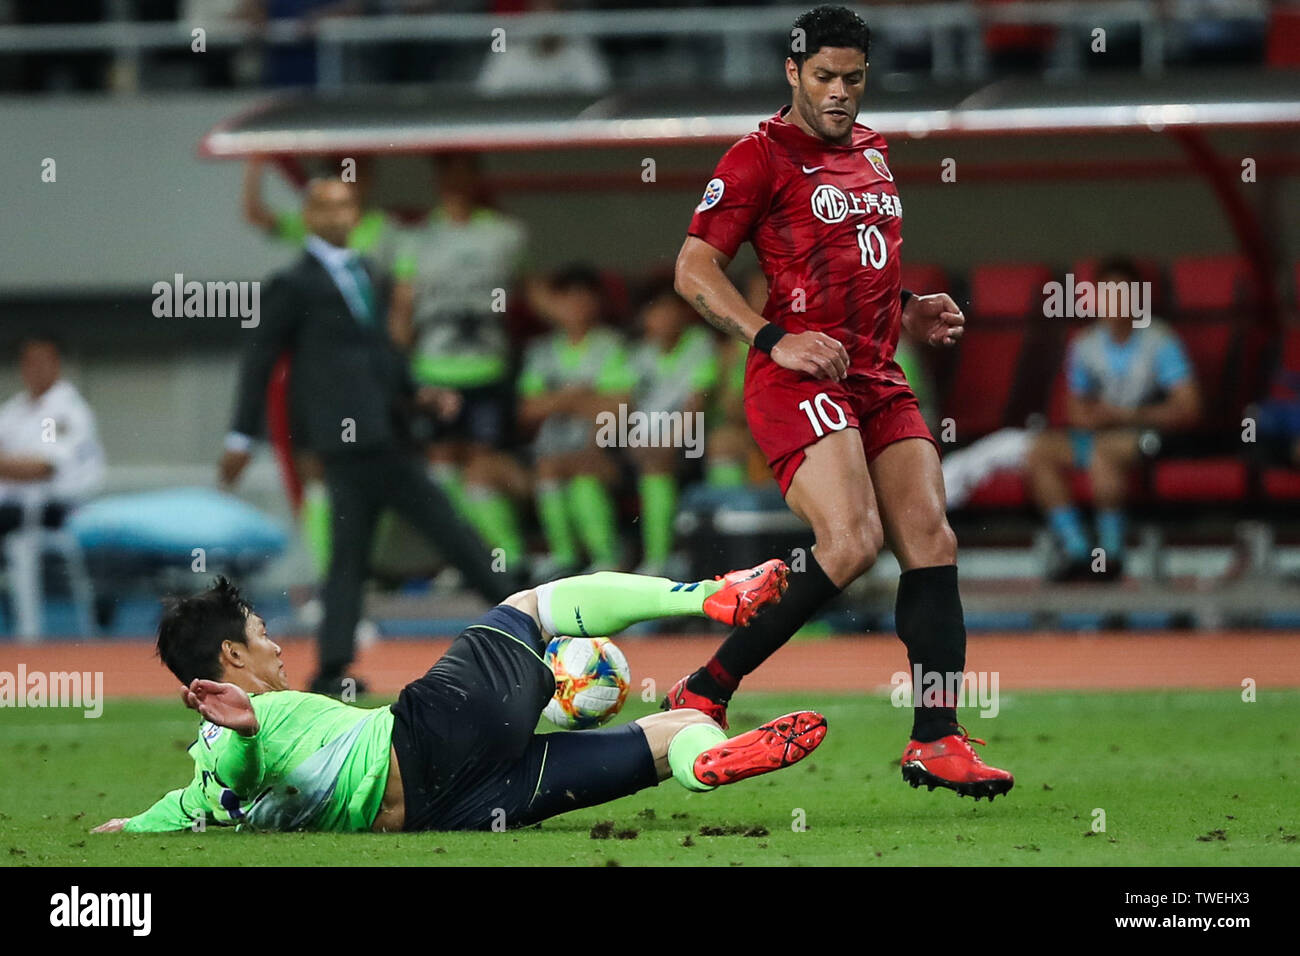 Brazilian football player Givanildo Vieira de Sousa, known as Hulk, right, of China's Shanghai SIPG F.C. passes the ball against a player of South Korea's Jeonbuk Hyundai Motors FC in the eighth-final match during the 2019 AFC Champions League in Shanghai, China, 19 June 2019. Two-time champions Jeonbuk Hyundai Motors will take an advantage into the second leg of their 2019 AFC Champions League (ACL) Round of 16 game with Shanghai SIPG FC next week after netting an away goal in their 1-1 draw in Shanghai on Wednesday. Stock Photo